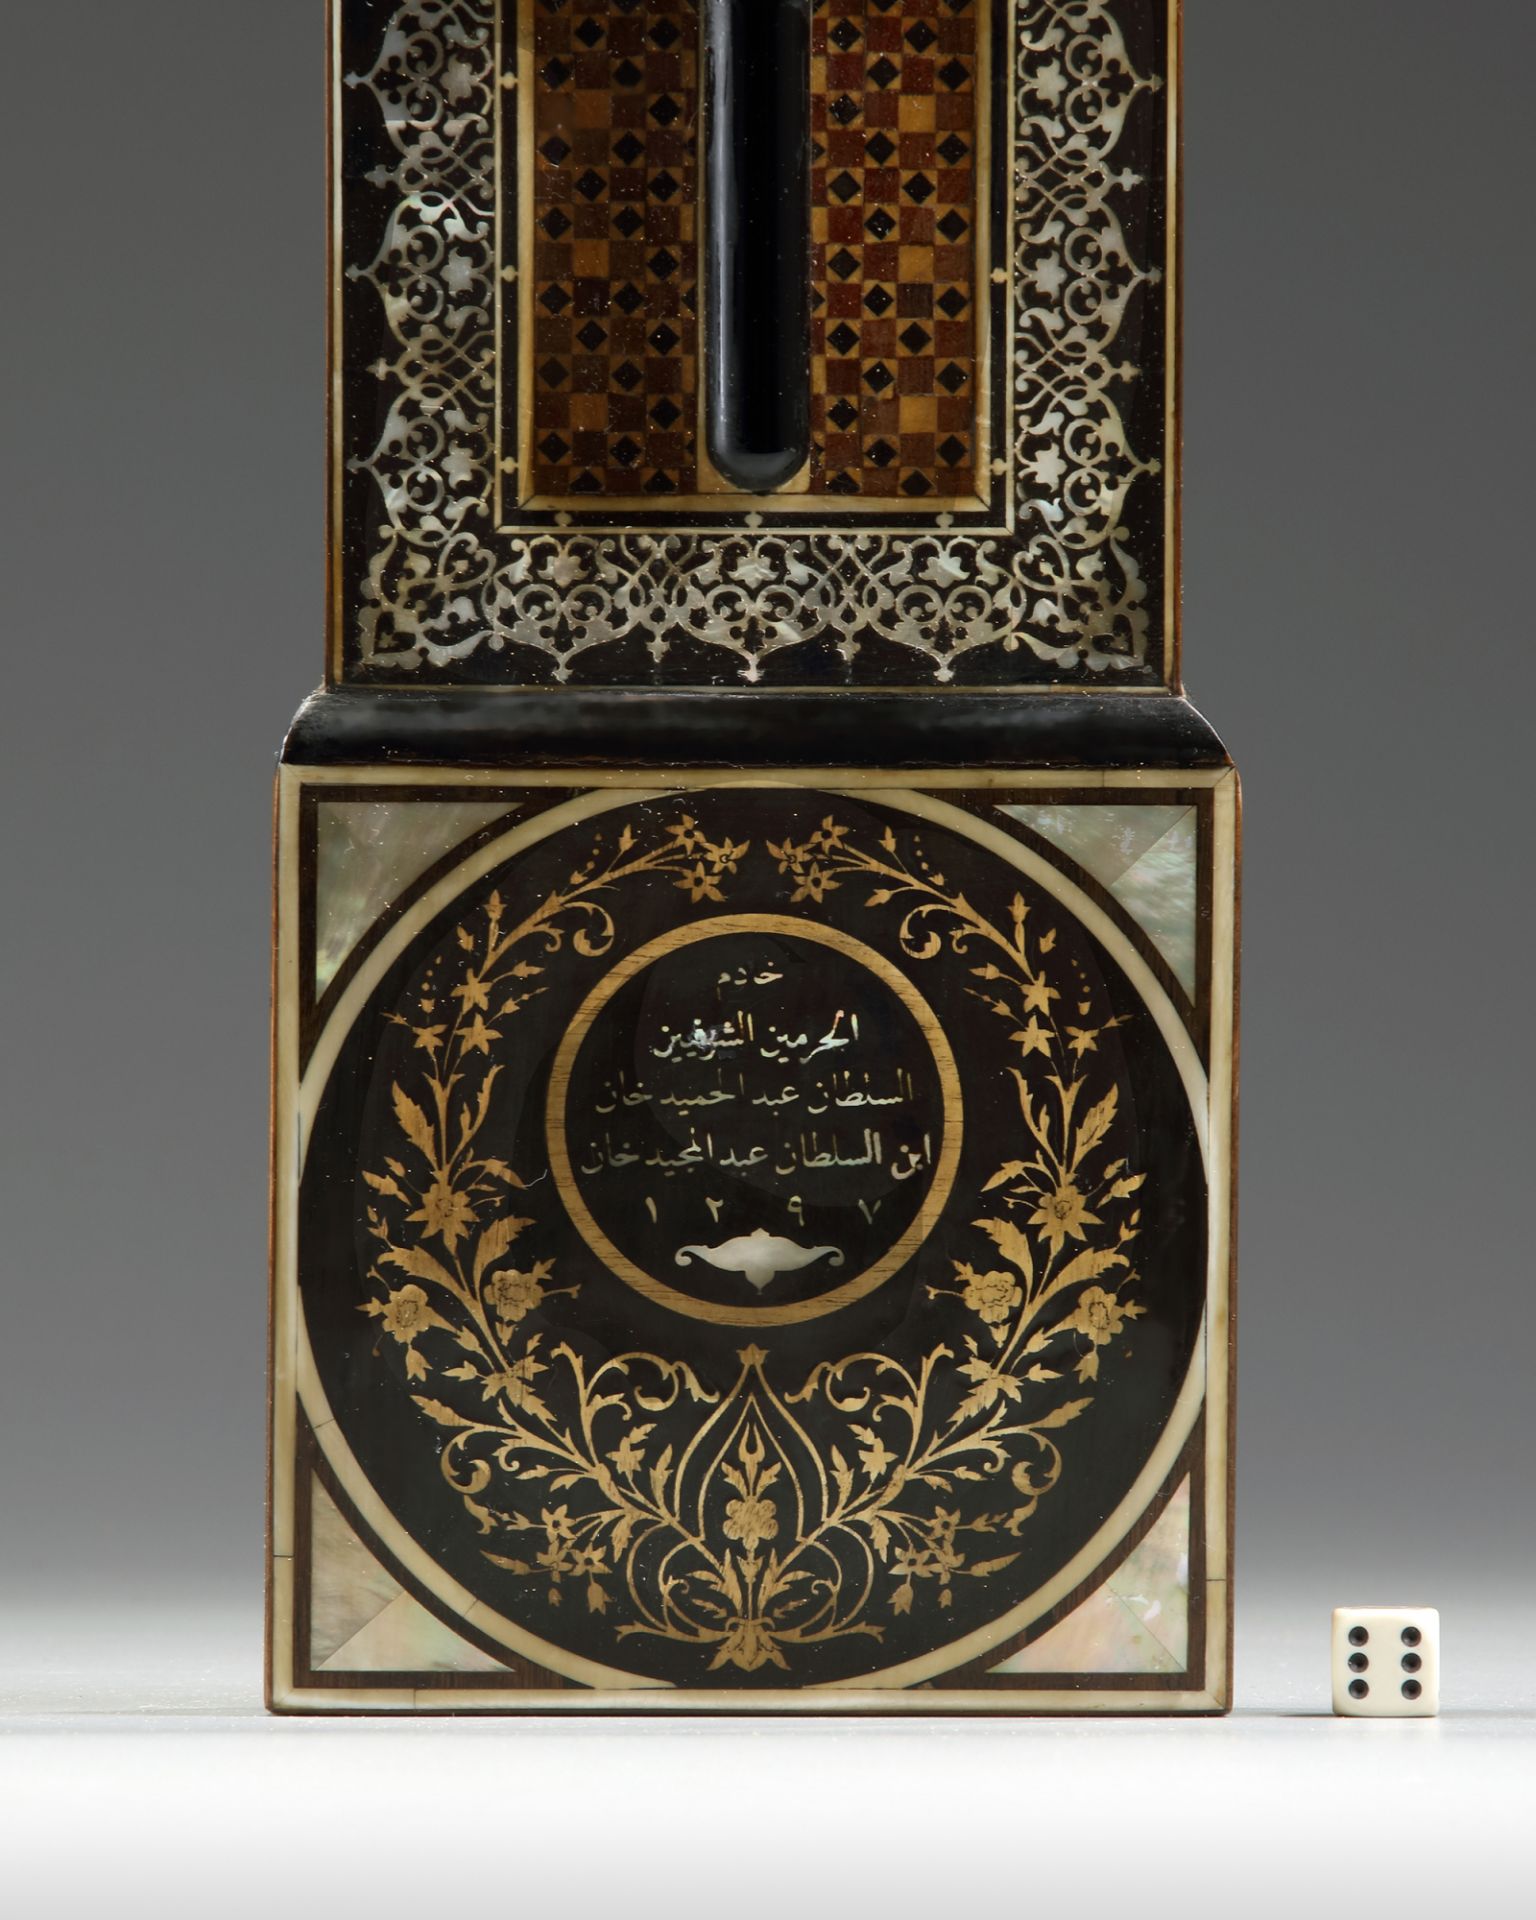 AN OTTOMAN WOODEN MOTHER-OF-PEARL AND IVORY INLAID BAROMETER,1297 AH/1879 - 1880 AD - Image 7 of 12